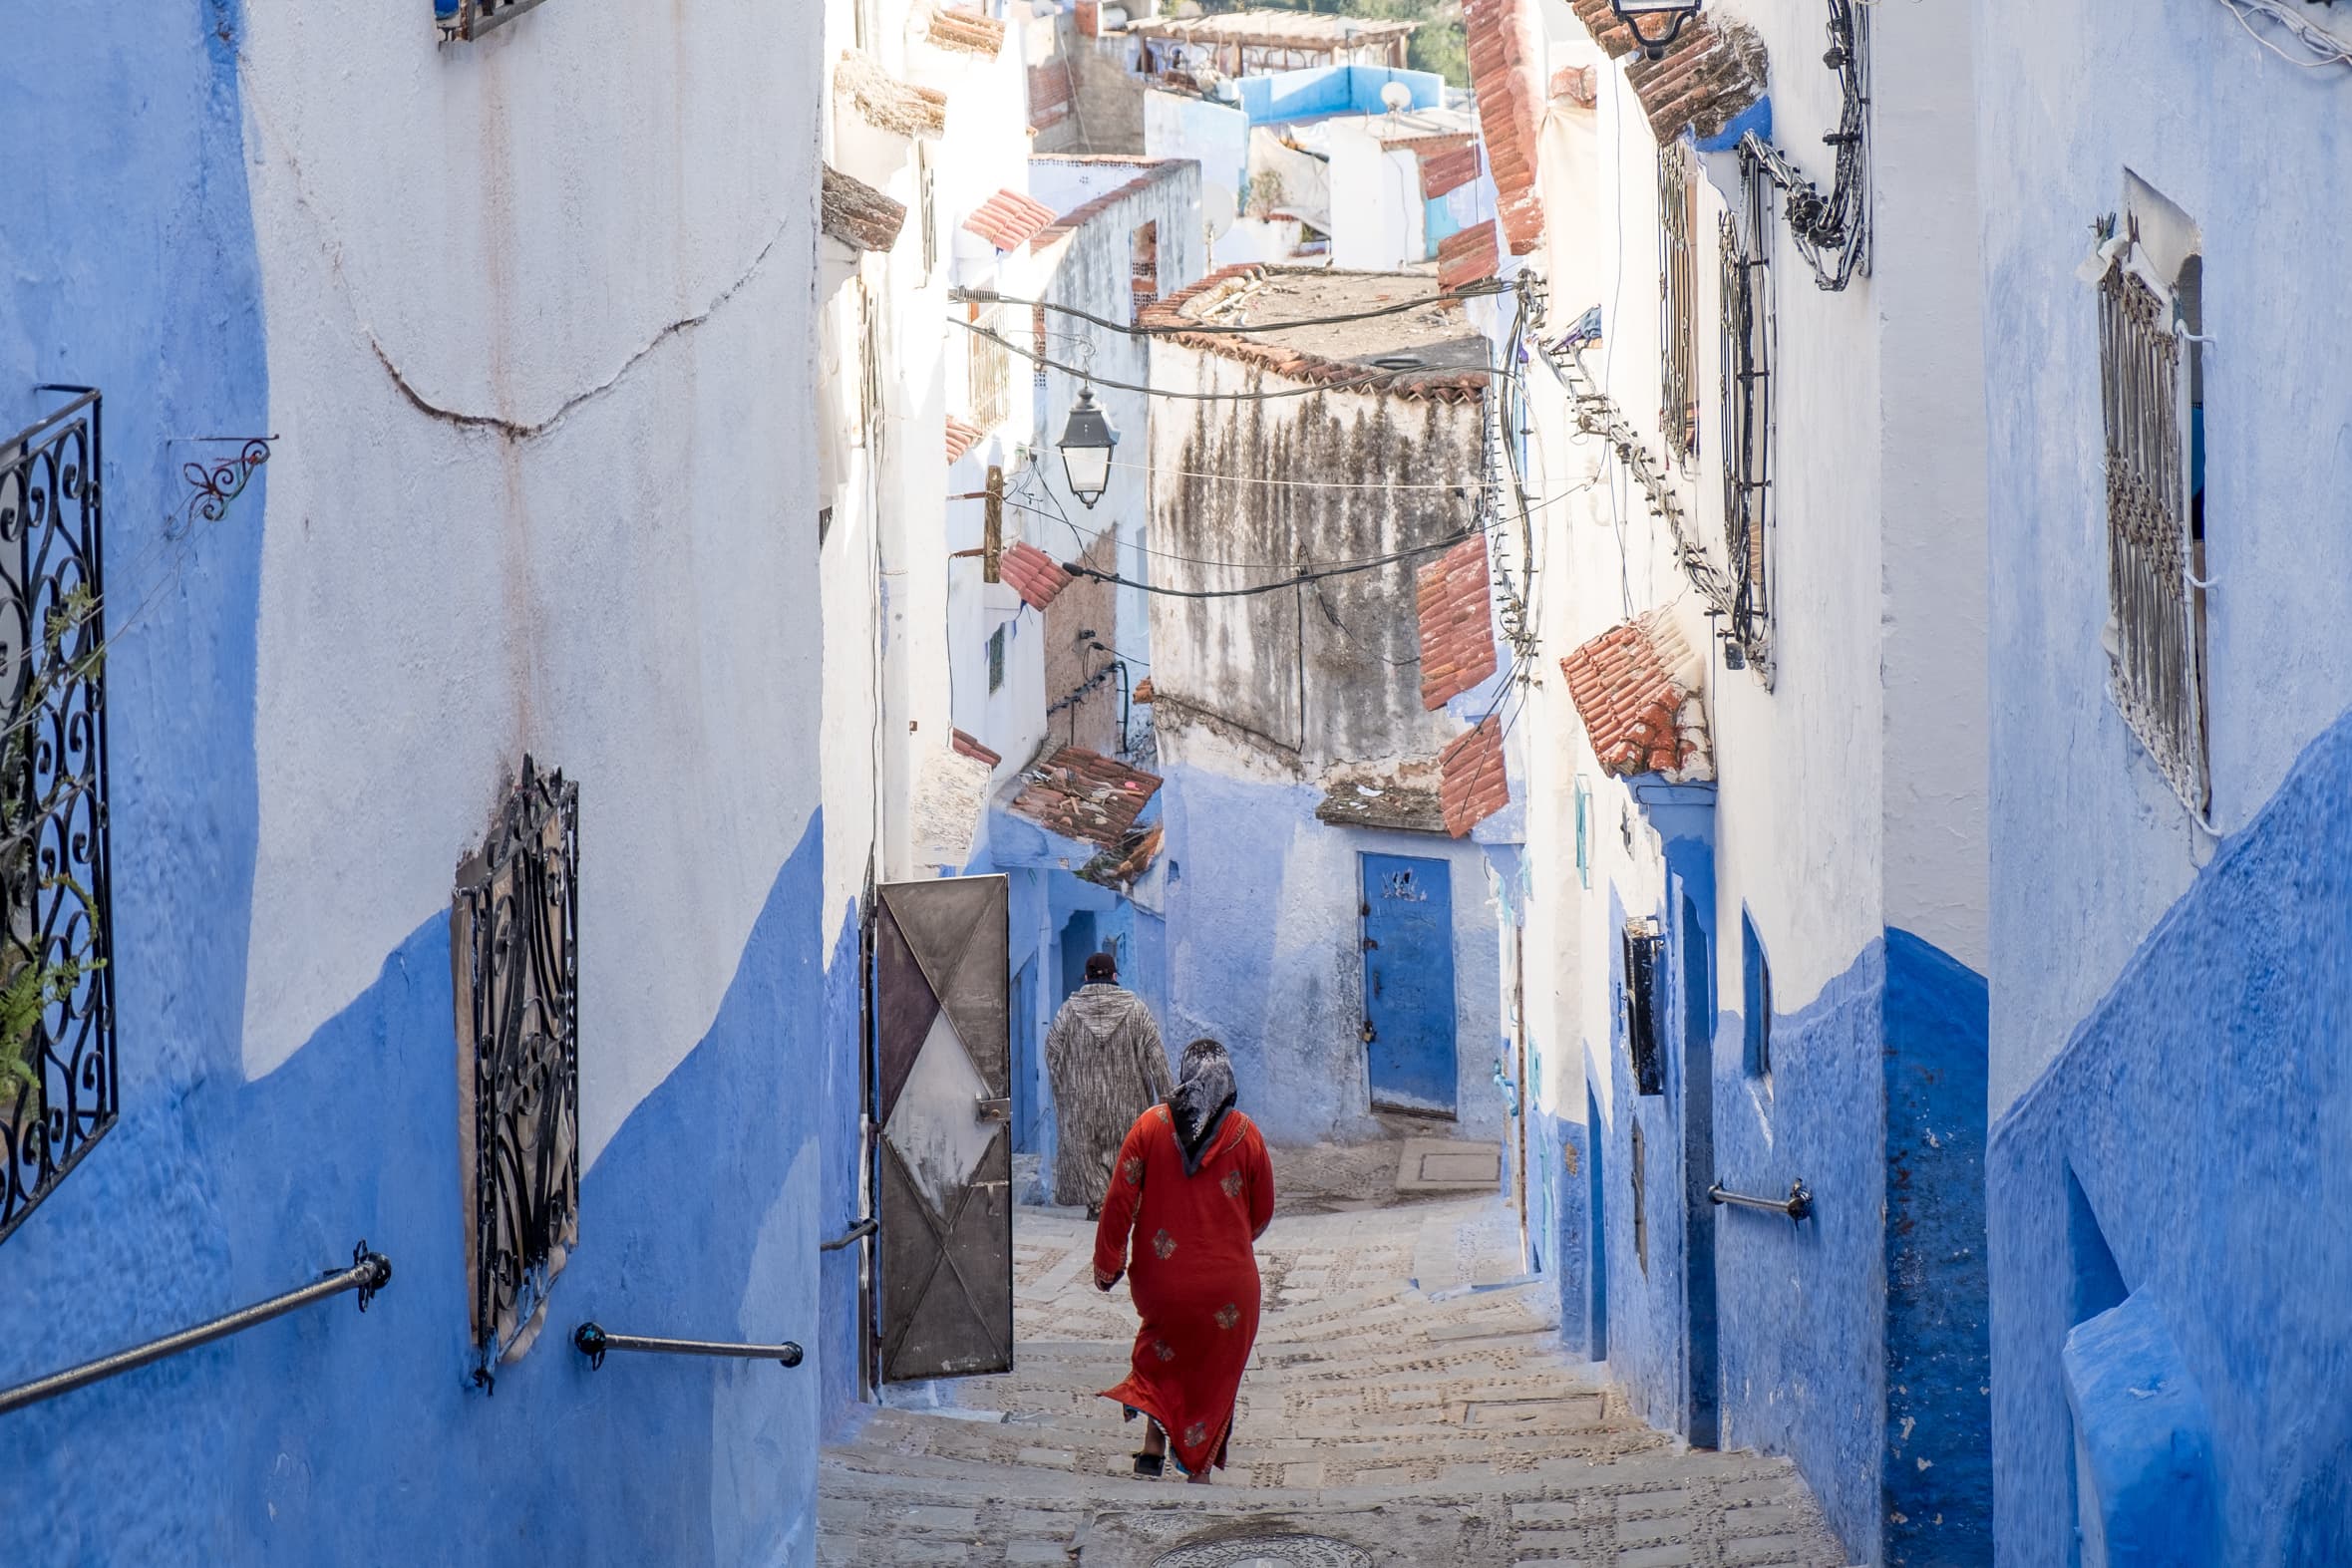 A woman in a red dress hurrying down a side street, Chefchaouen, Morocco